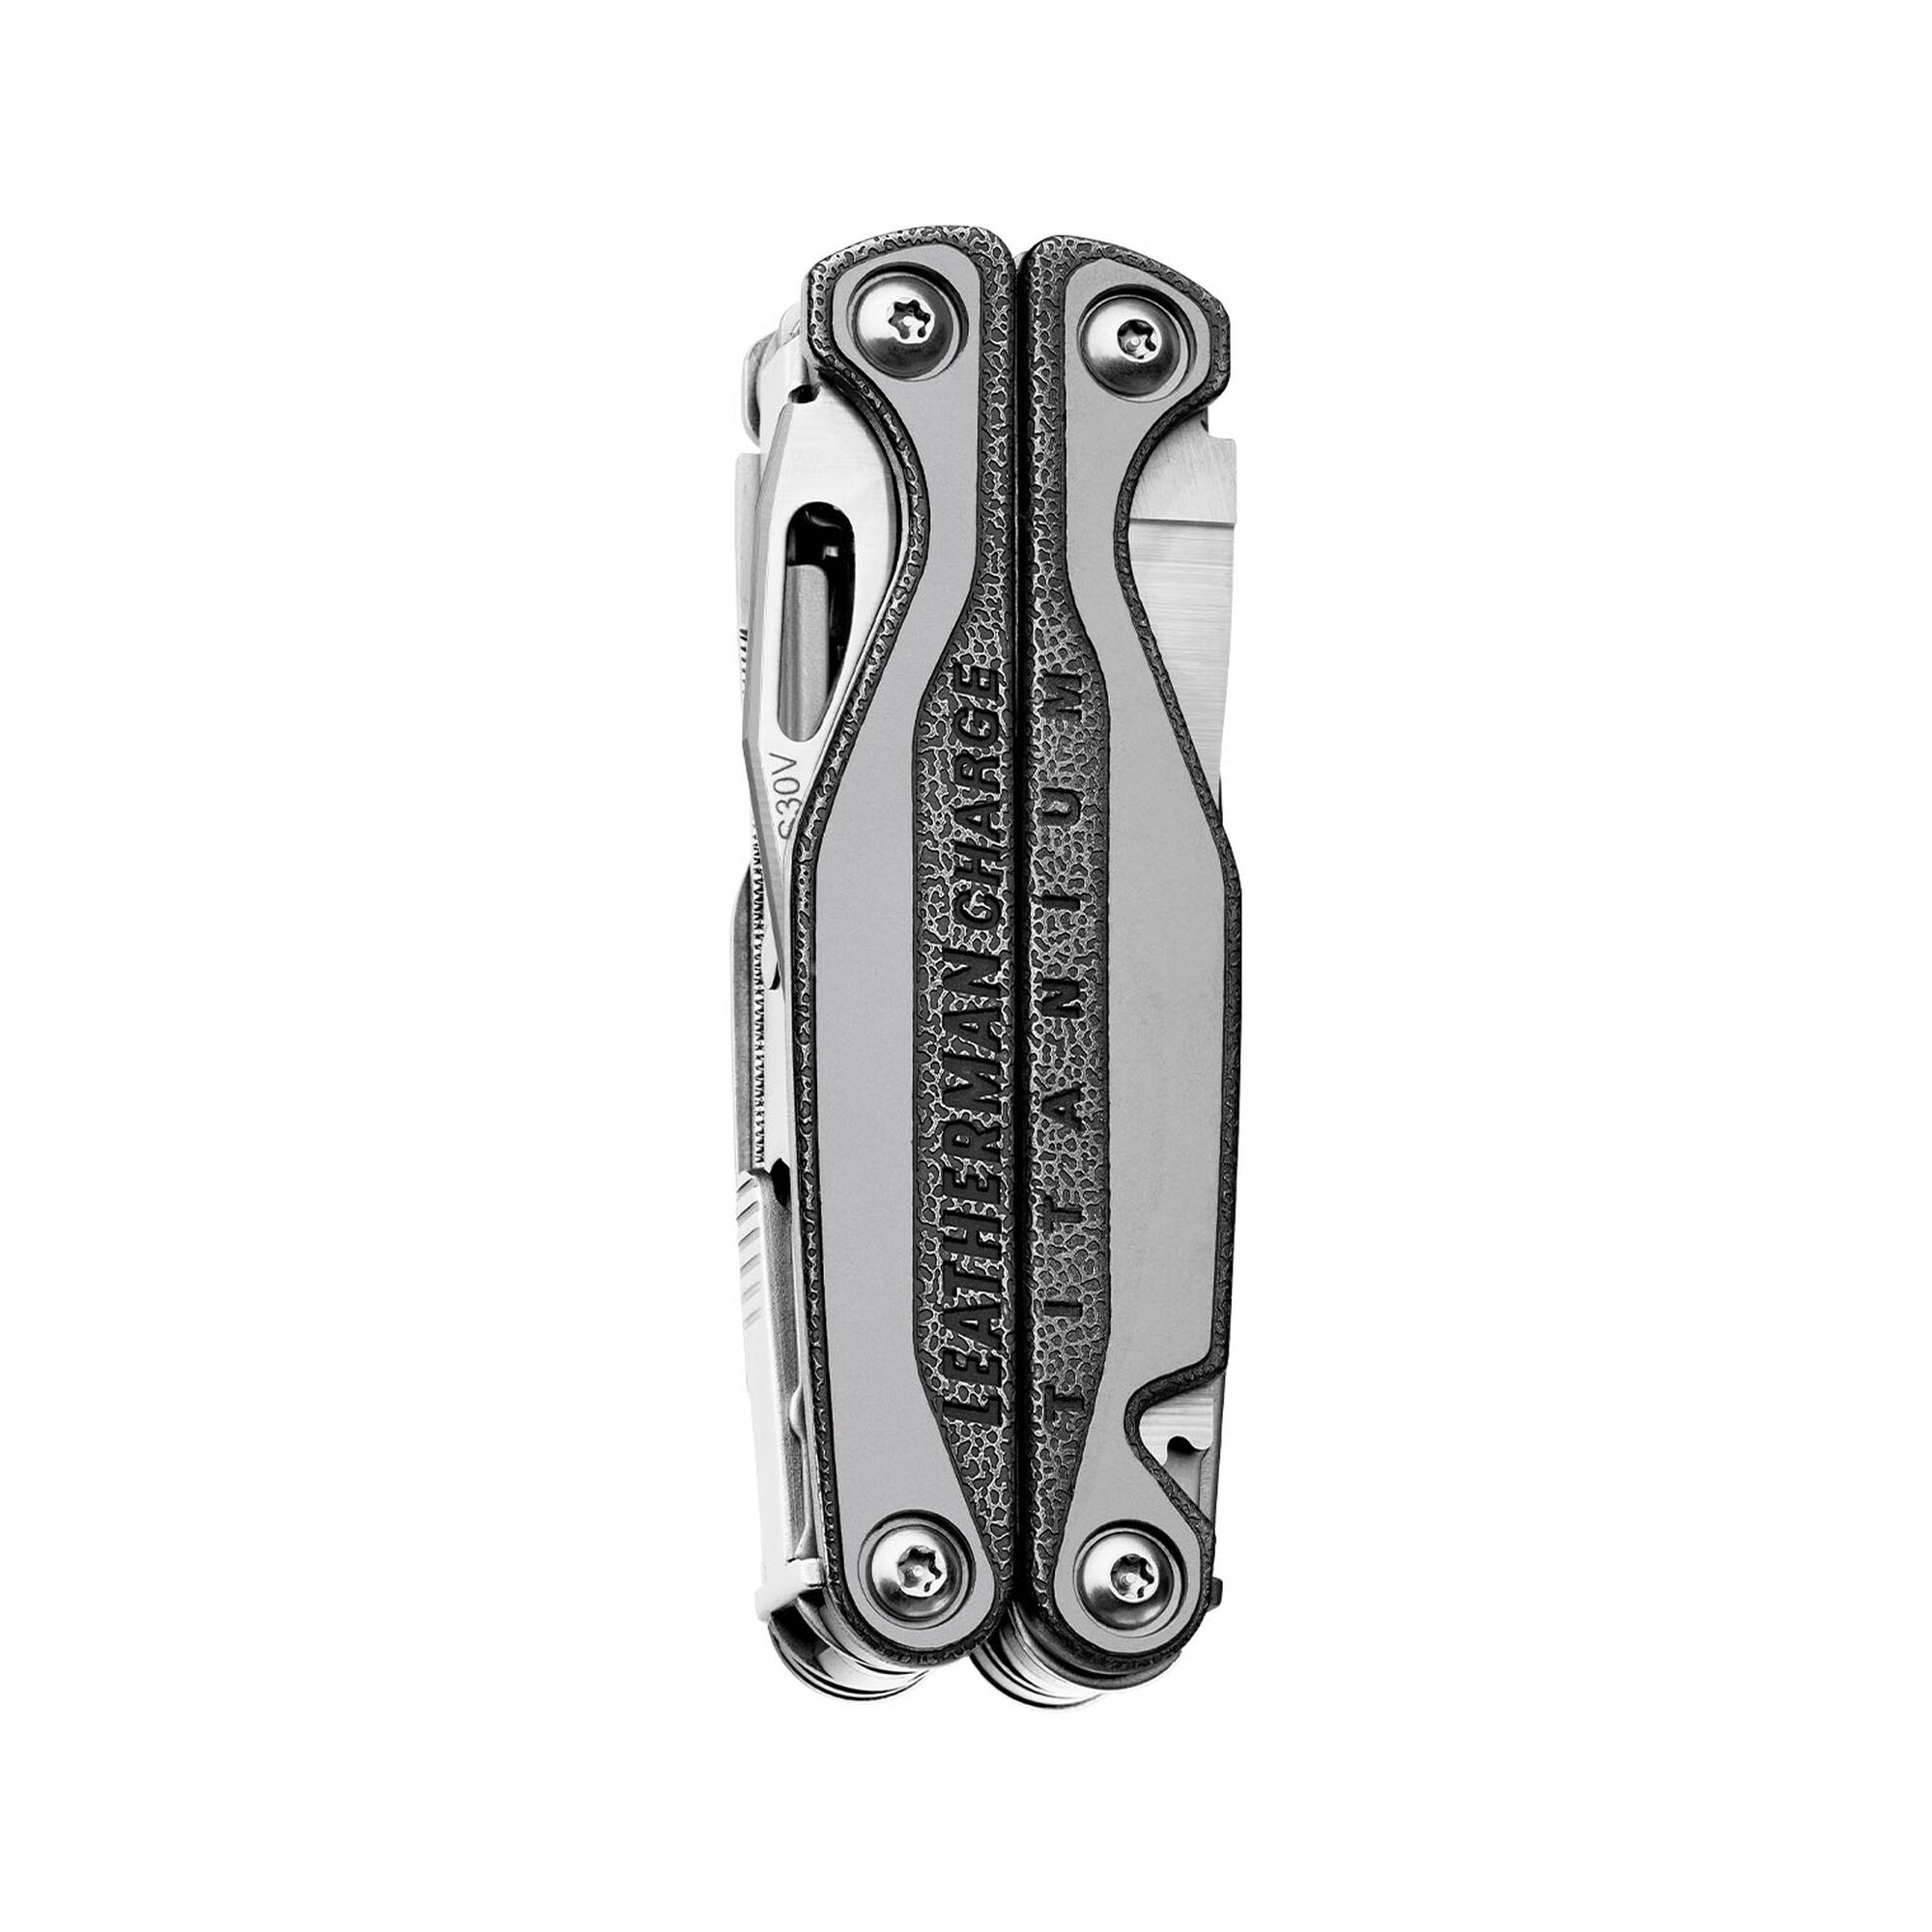 Leatherman Charge Plus - Multi-tool with 19 all locking tools including  knives, pliers, saw and screwdriver, camping and fishing tool made in the